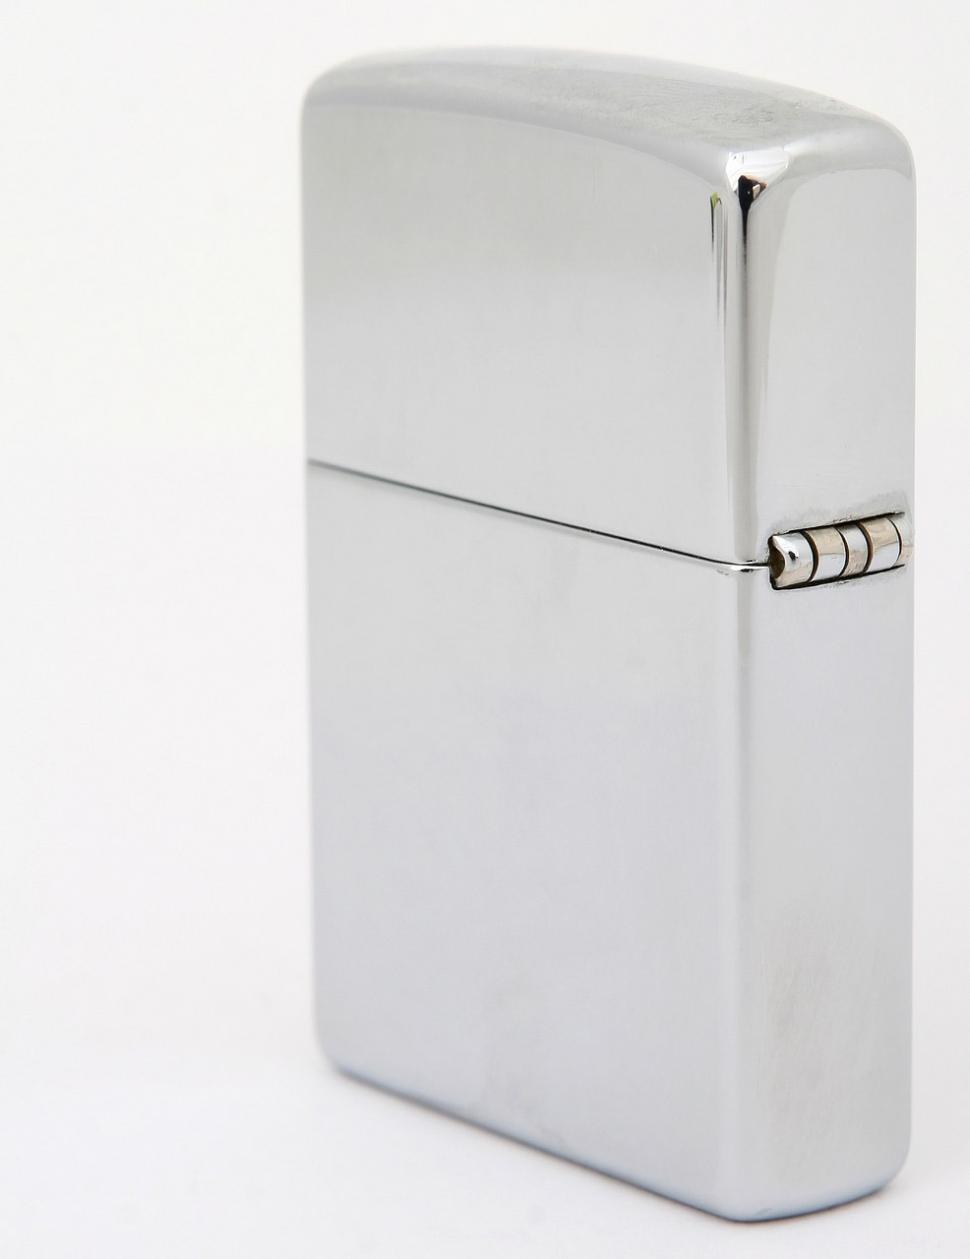 Free Image of Silver Lighter on White Background 